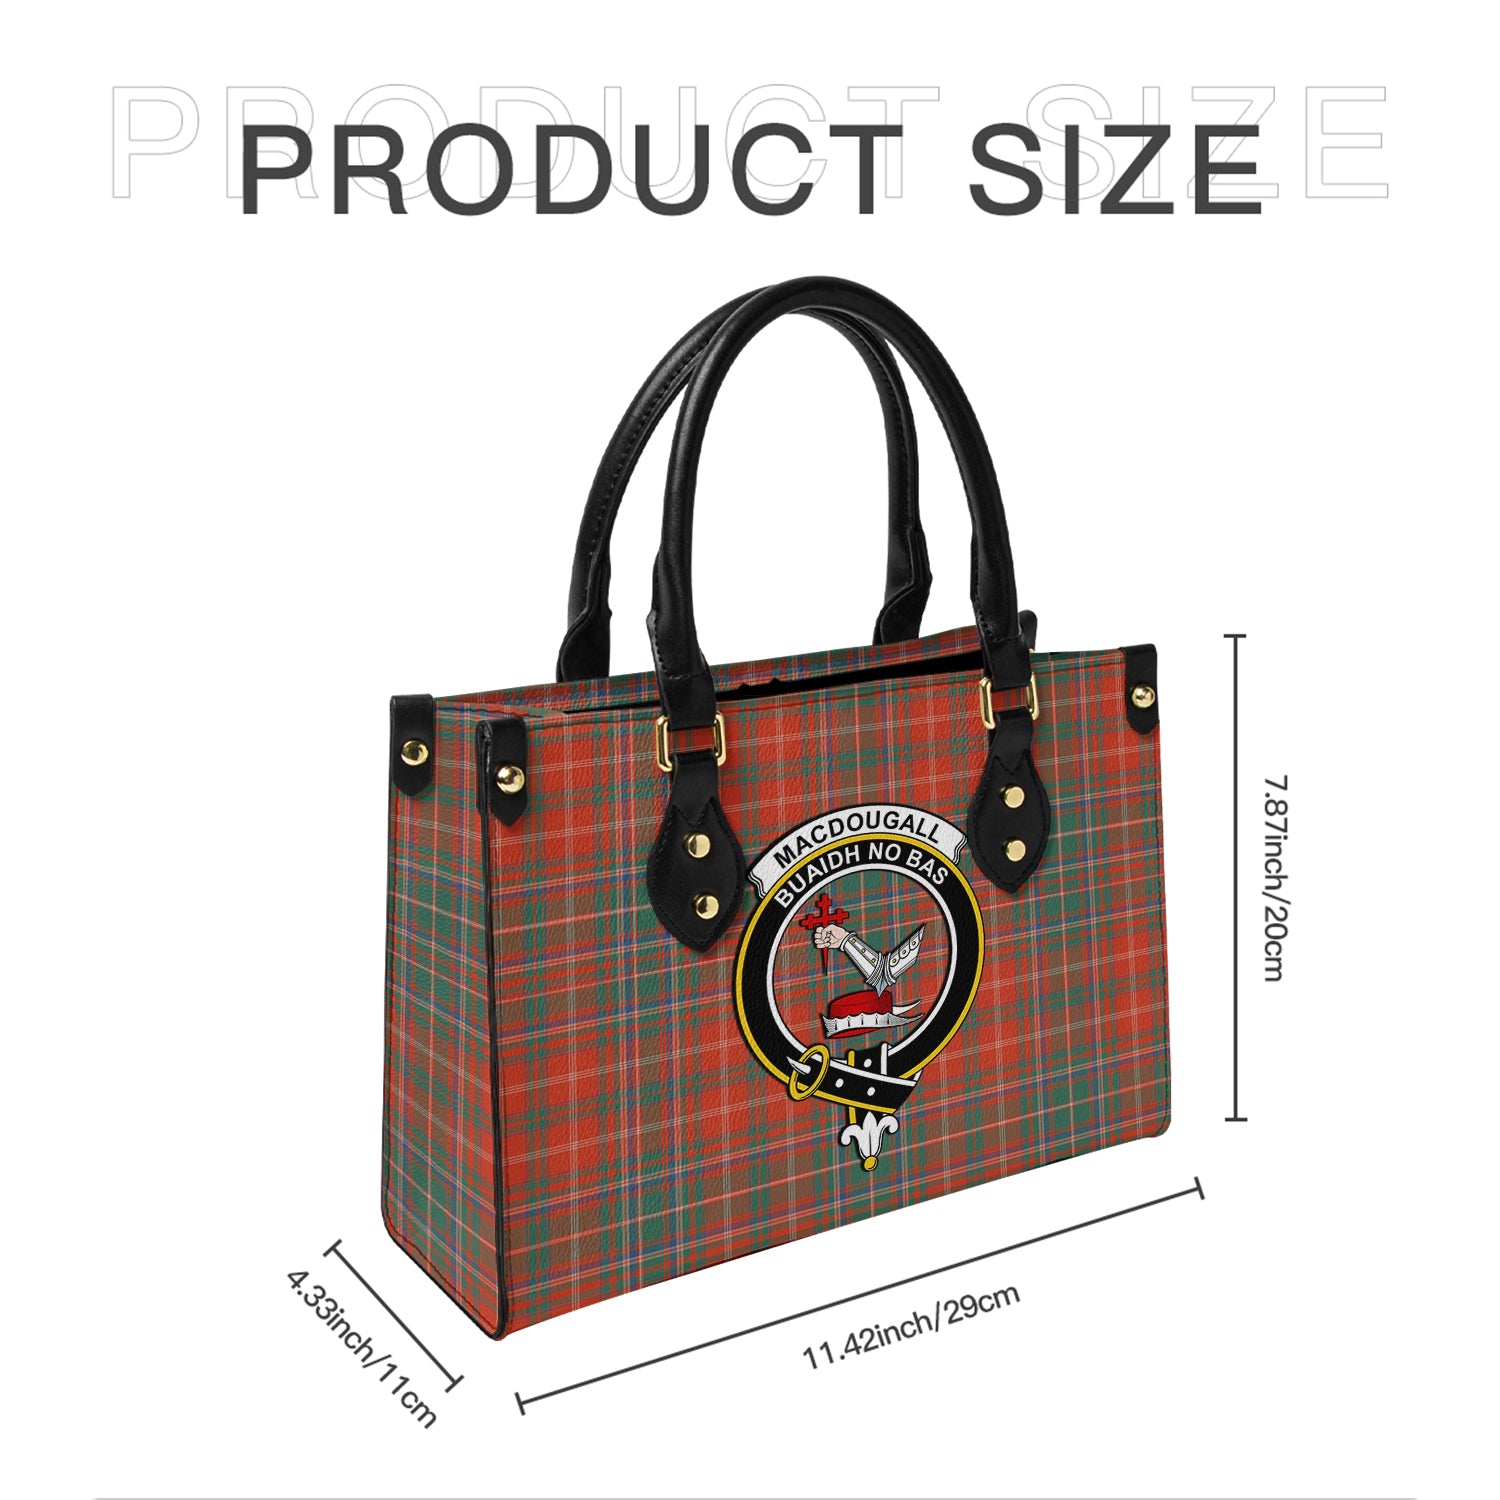 macdougall-ancient-tartan-leather-bag-with-family-crest